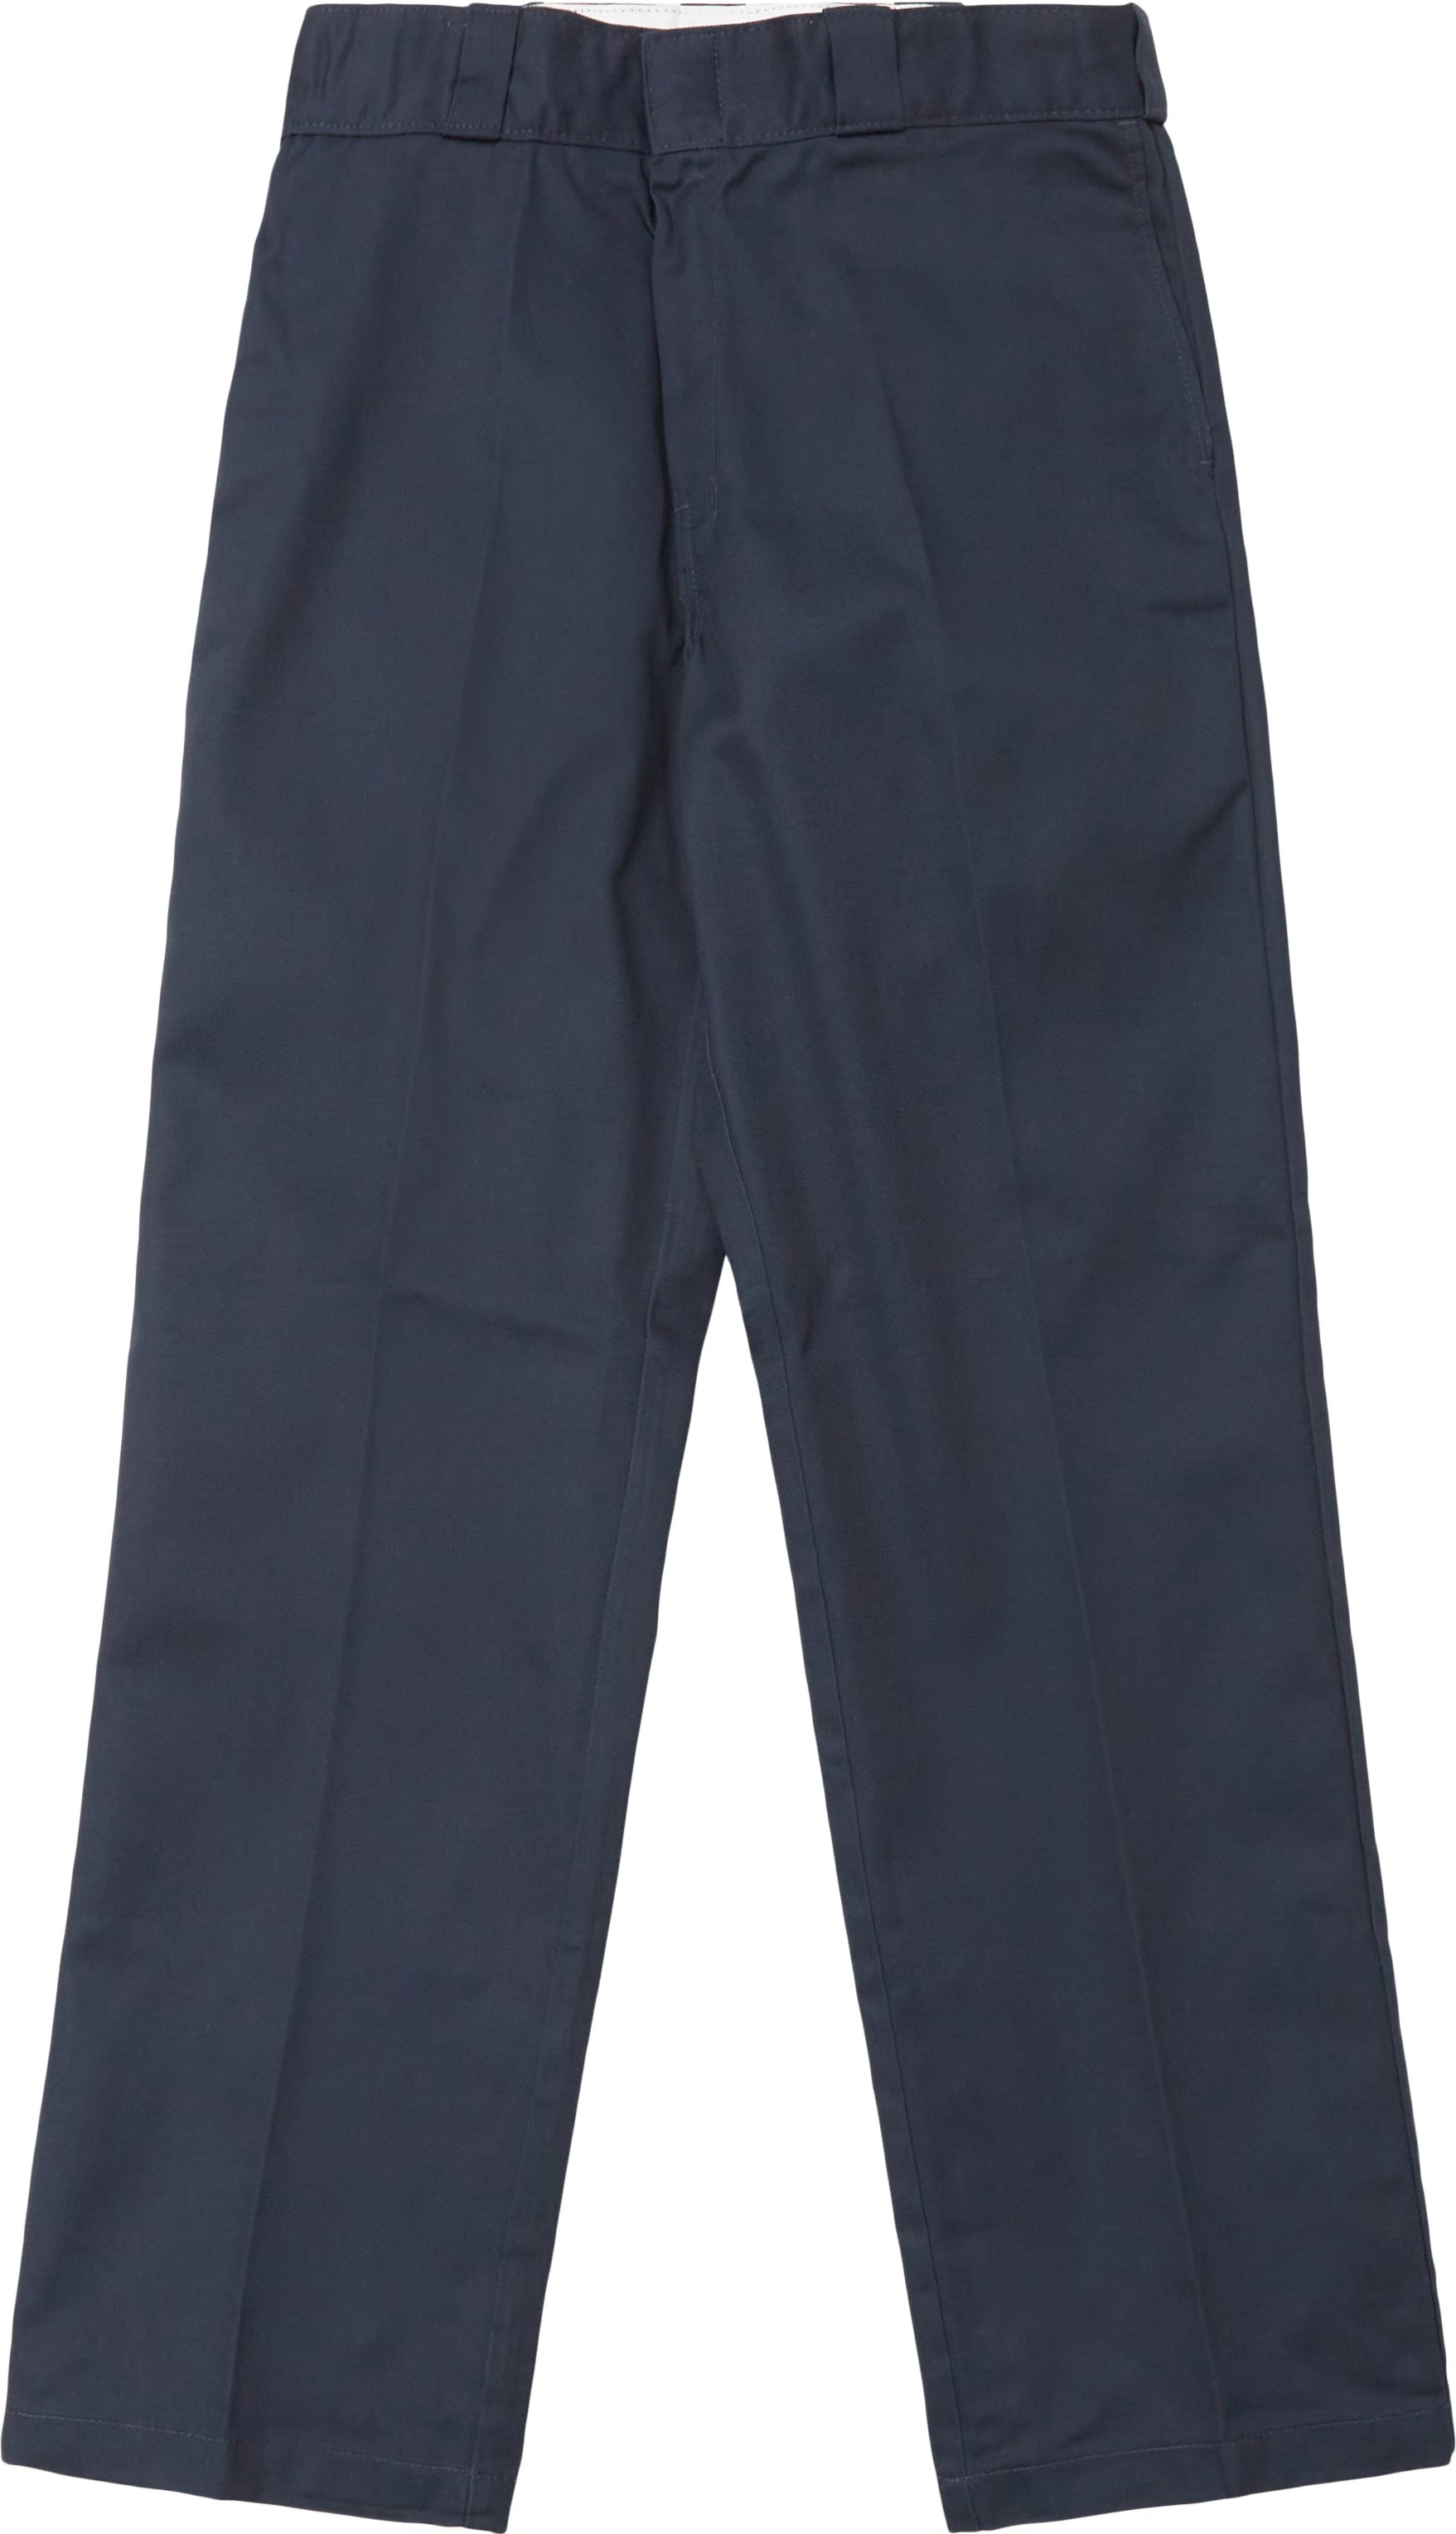 874 Work Pant - Trousers - Relaxed fit - Blue